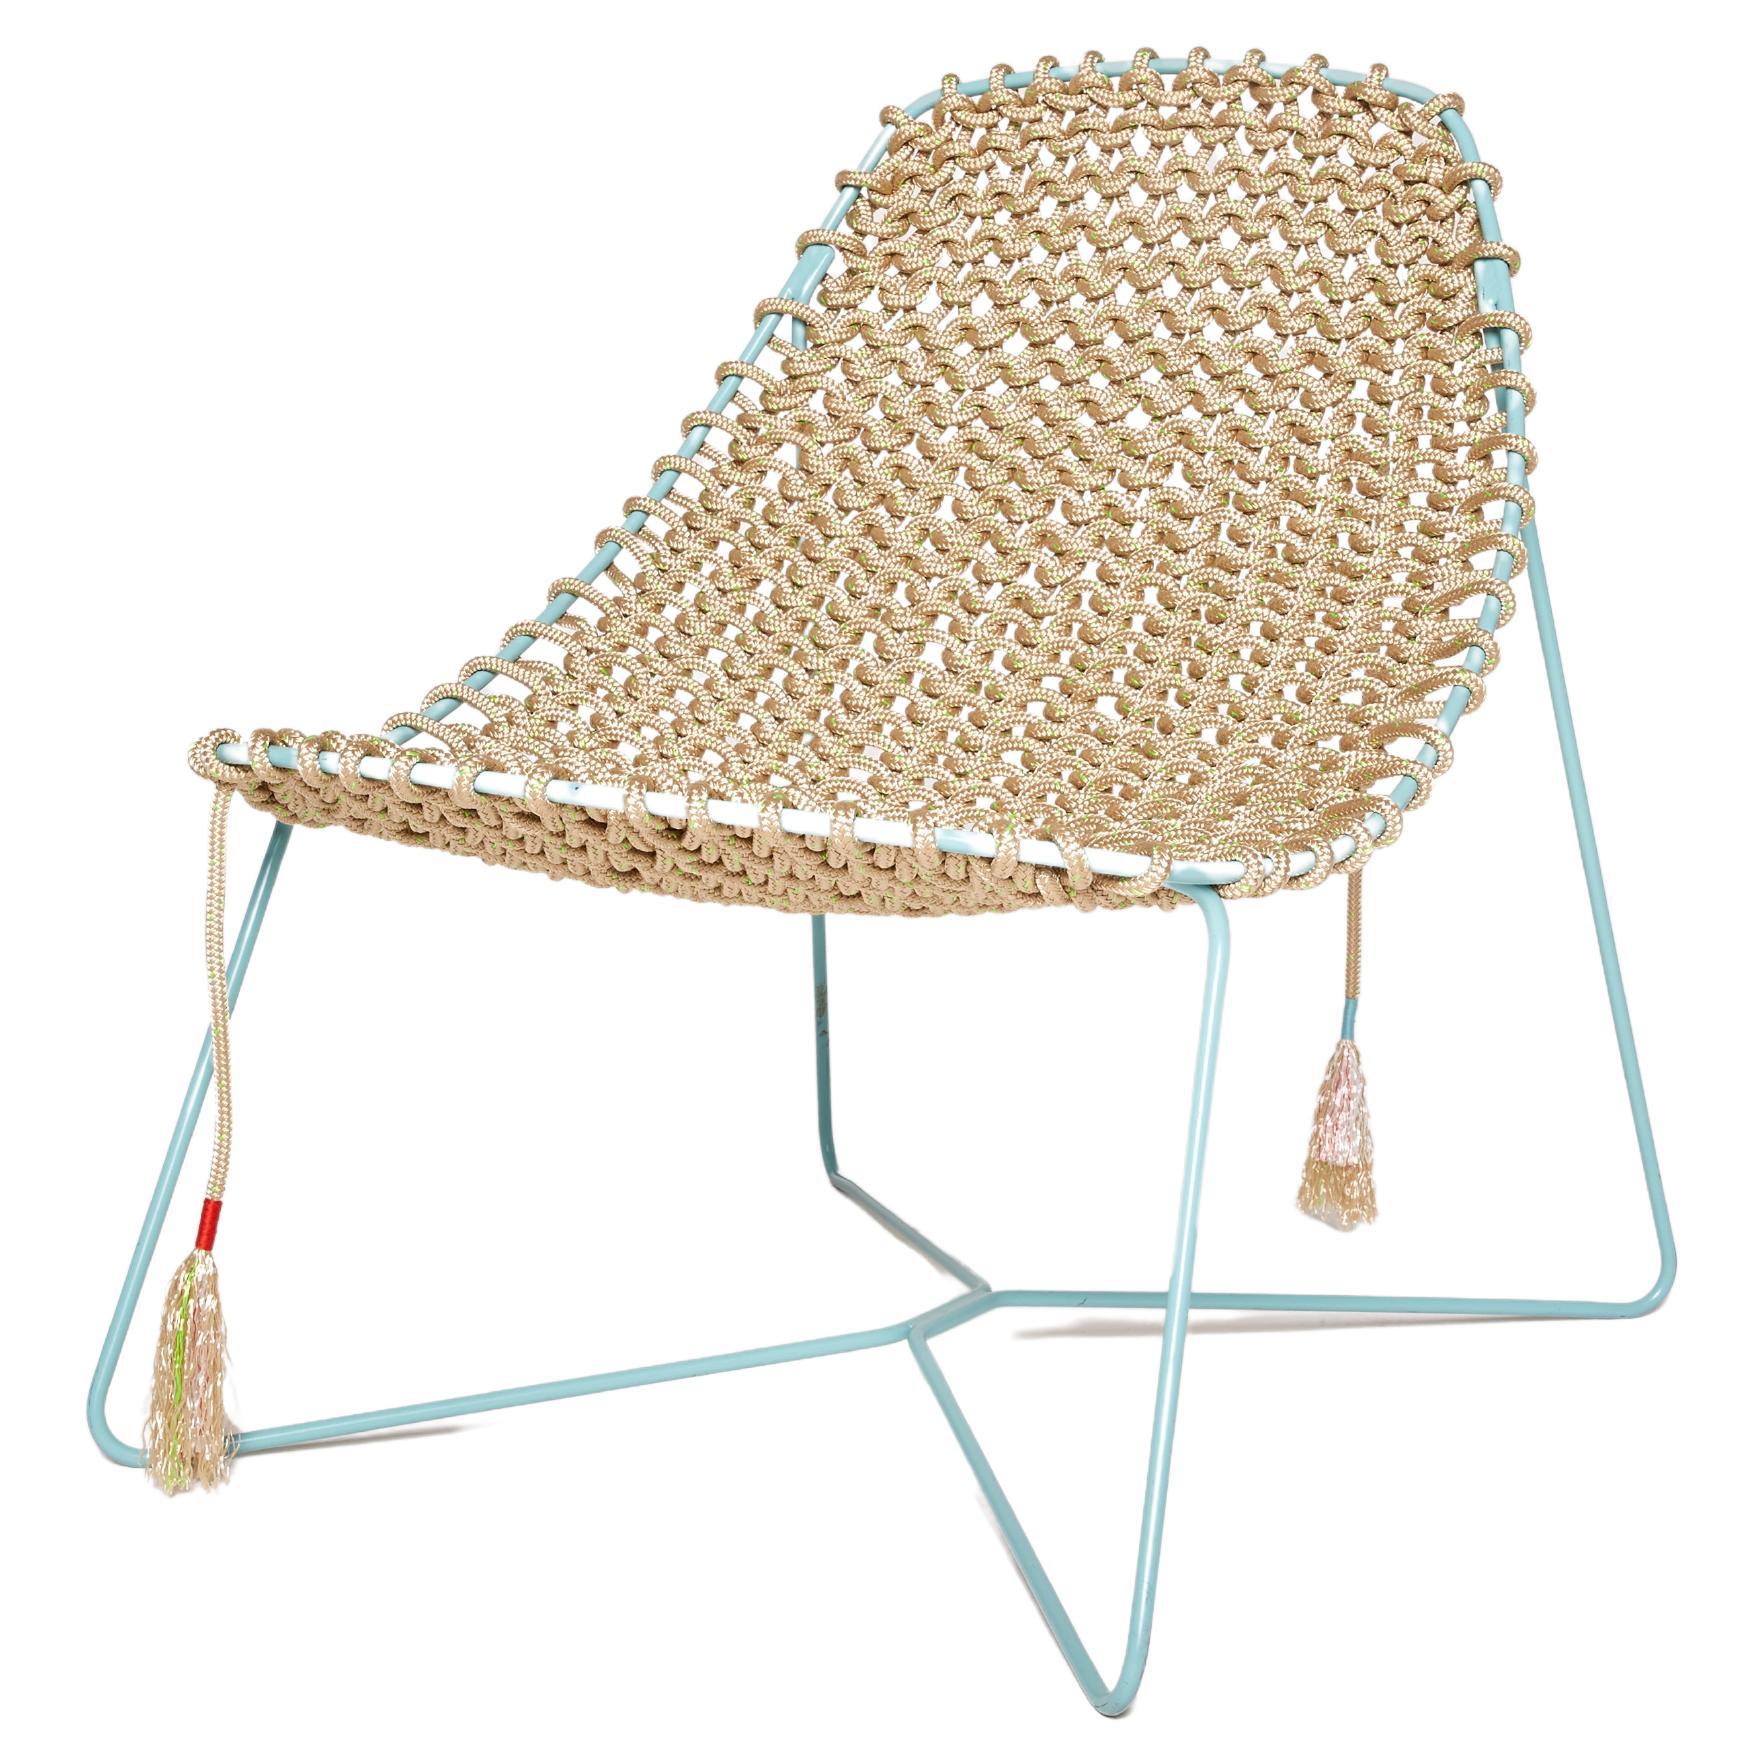 Award nominated beige hand knitted lounger with blue frame For Sale